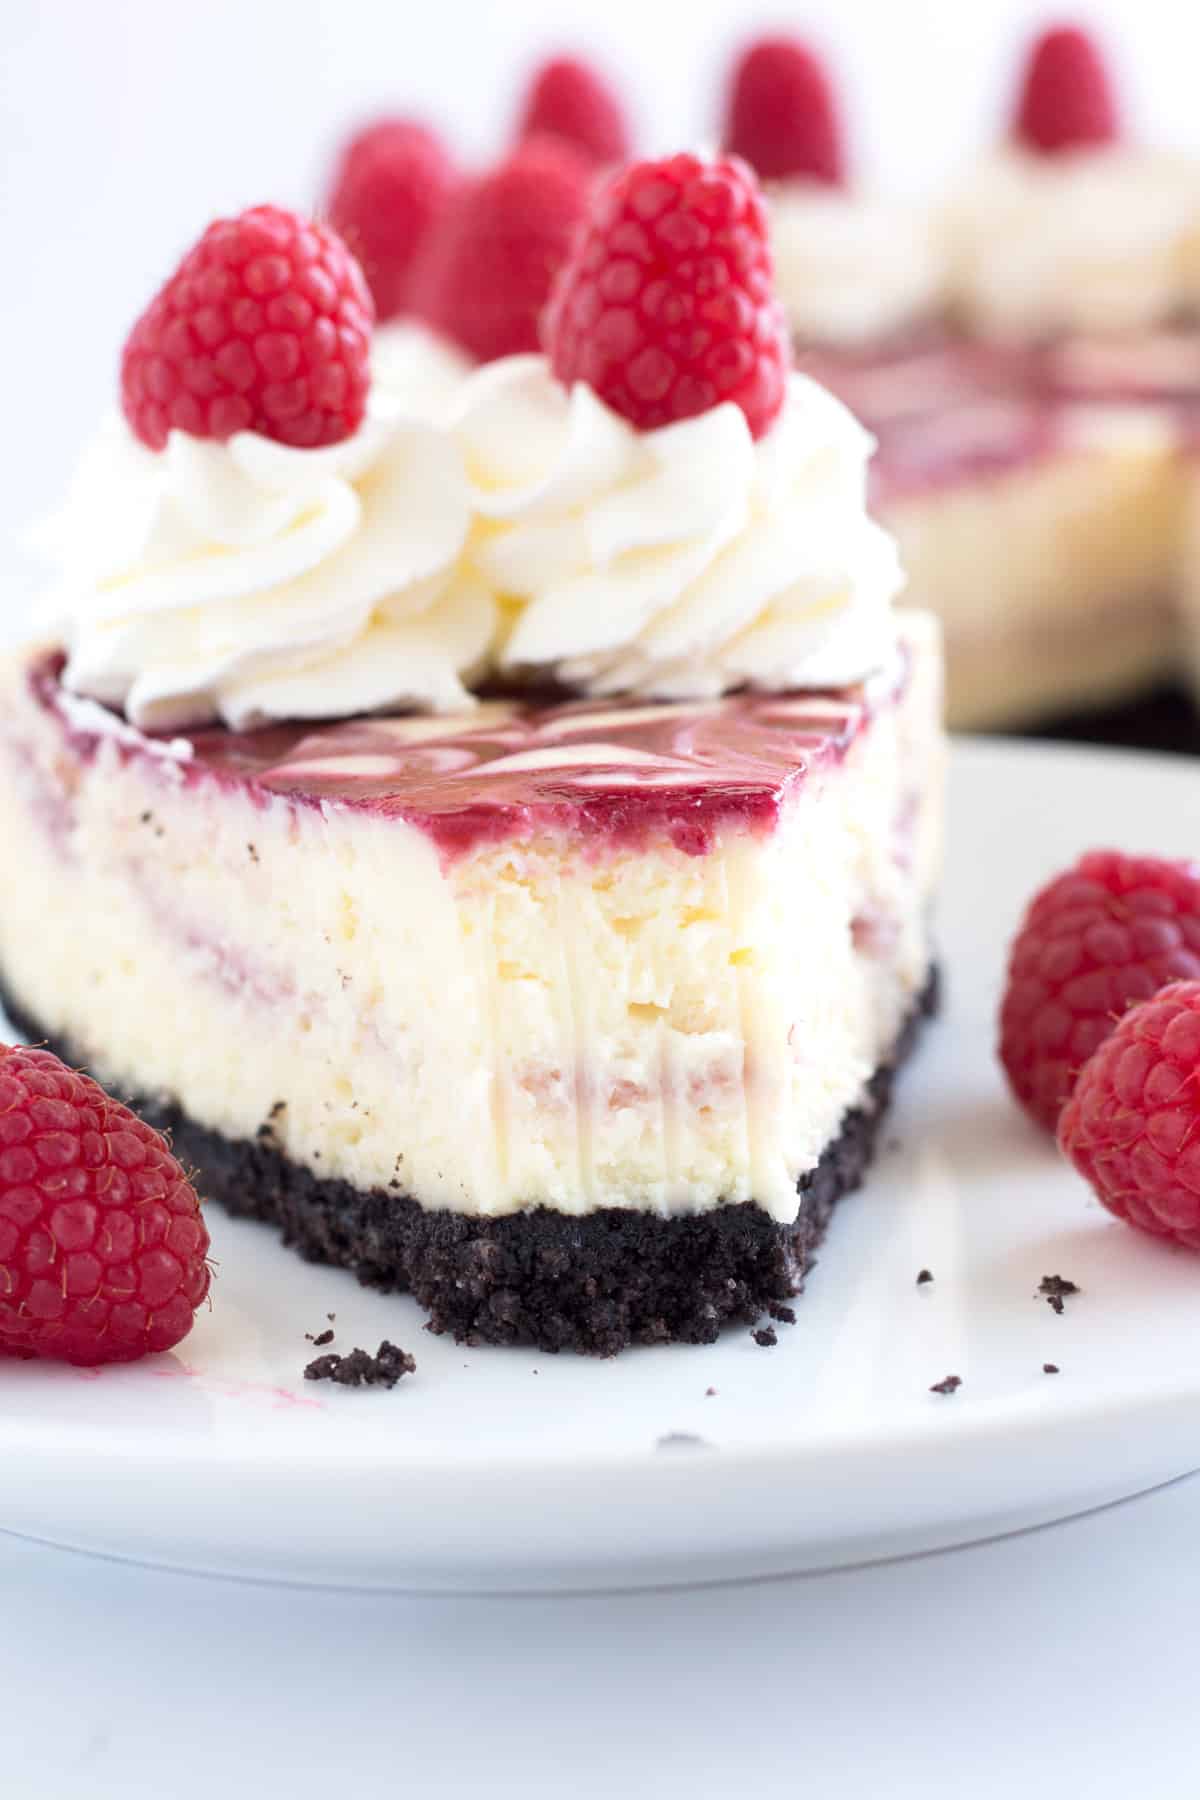 Bite removed from slice of white chocolate and raspberry cheesecake.